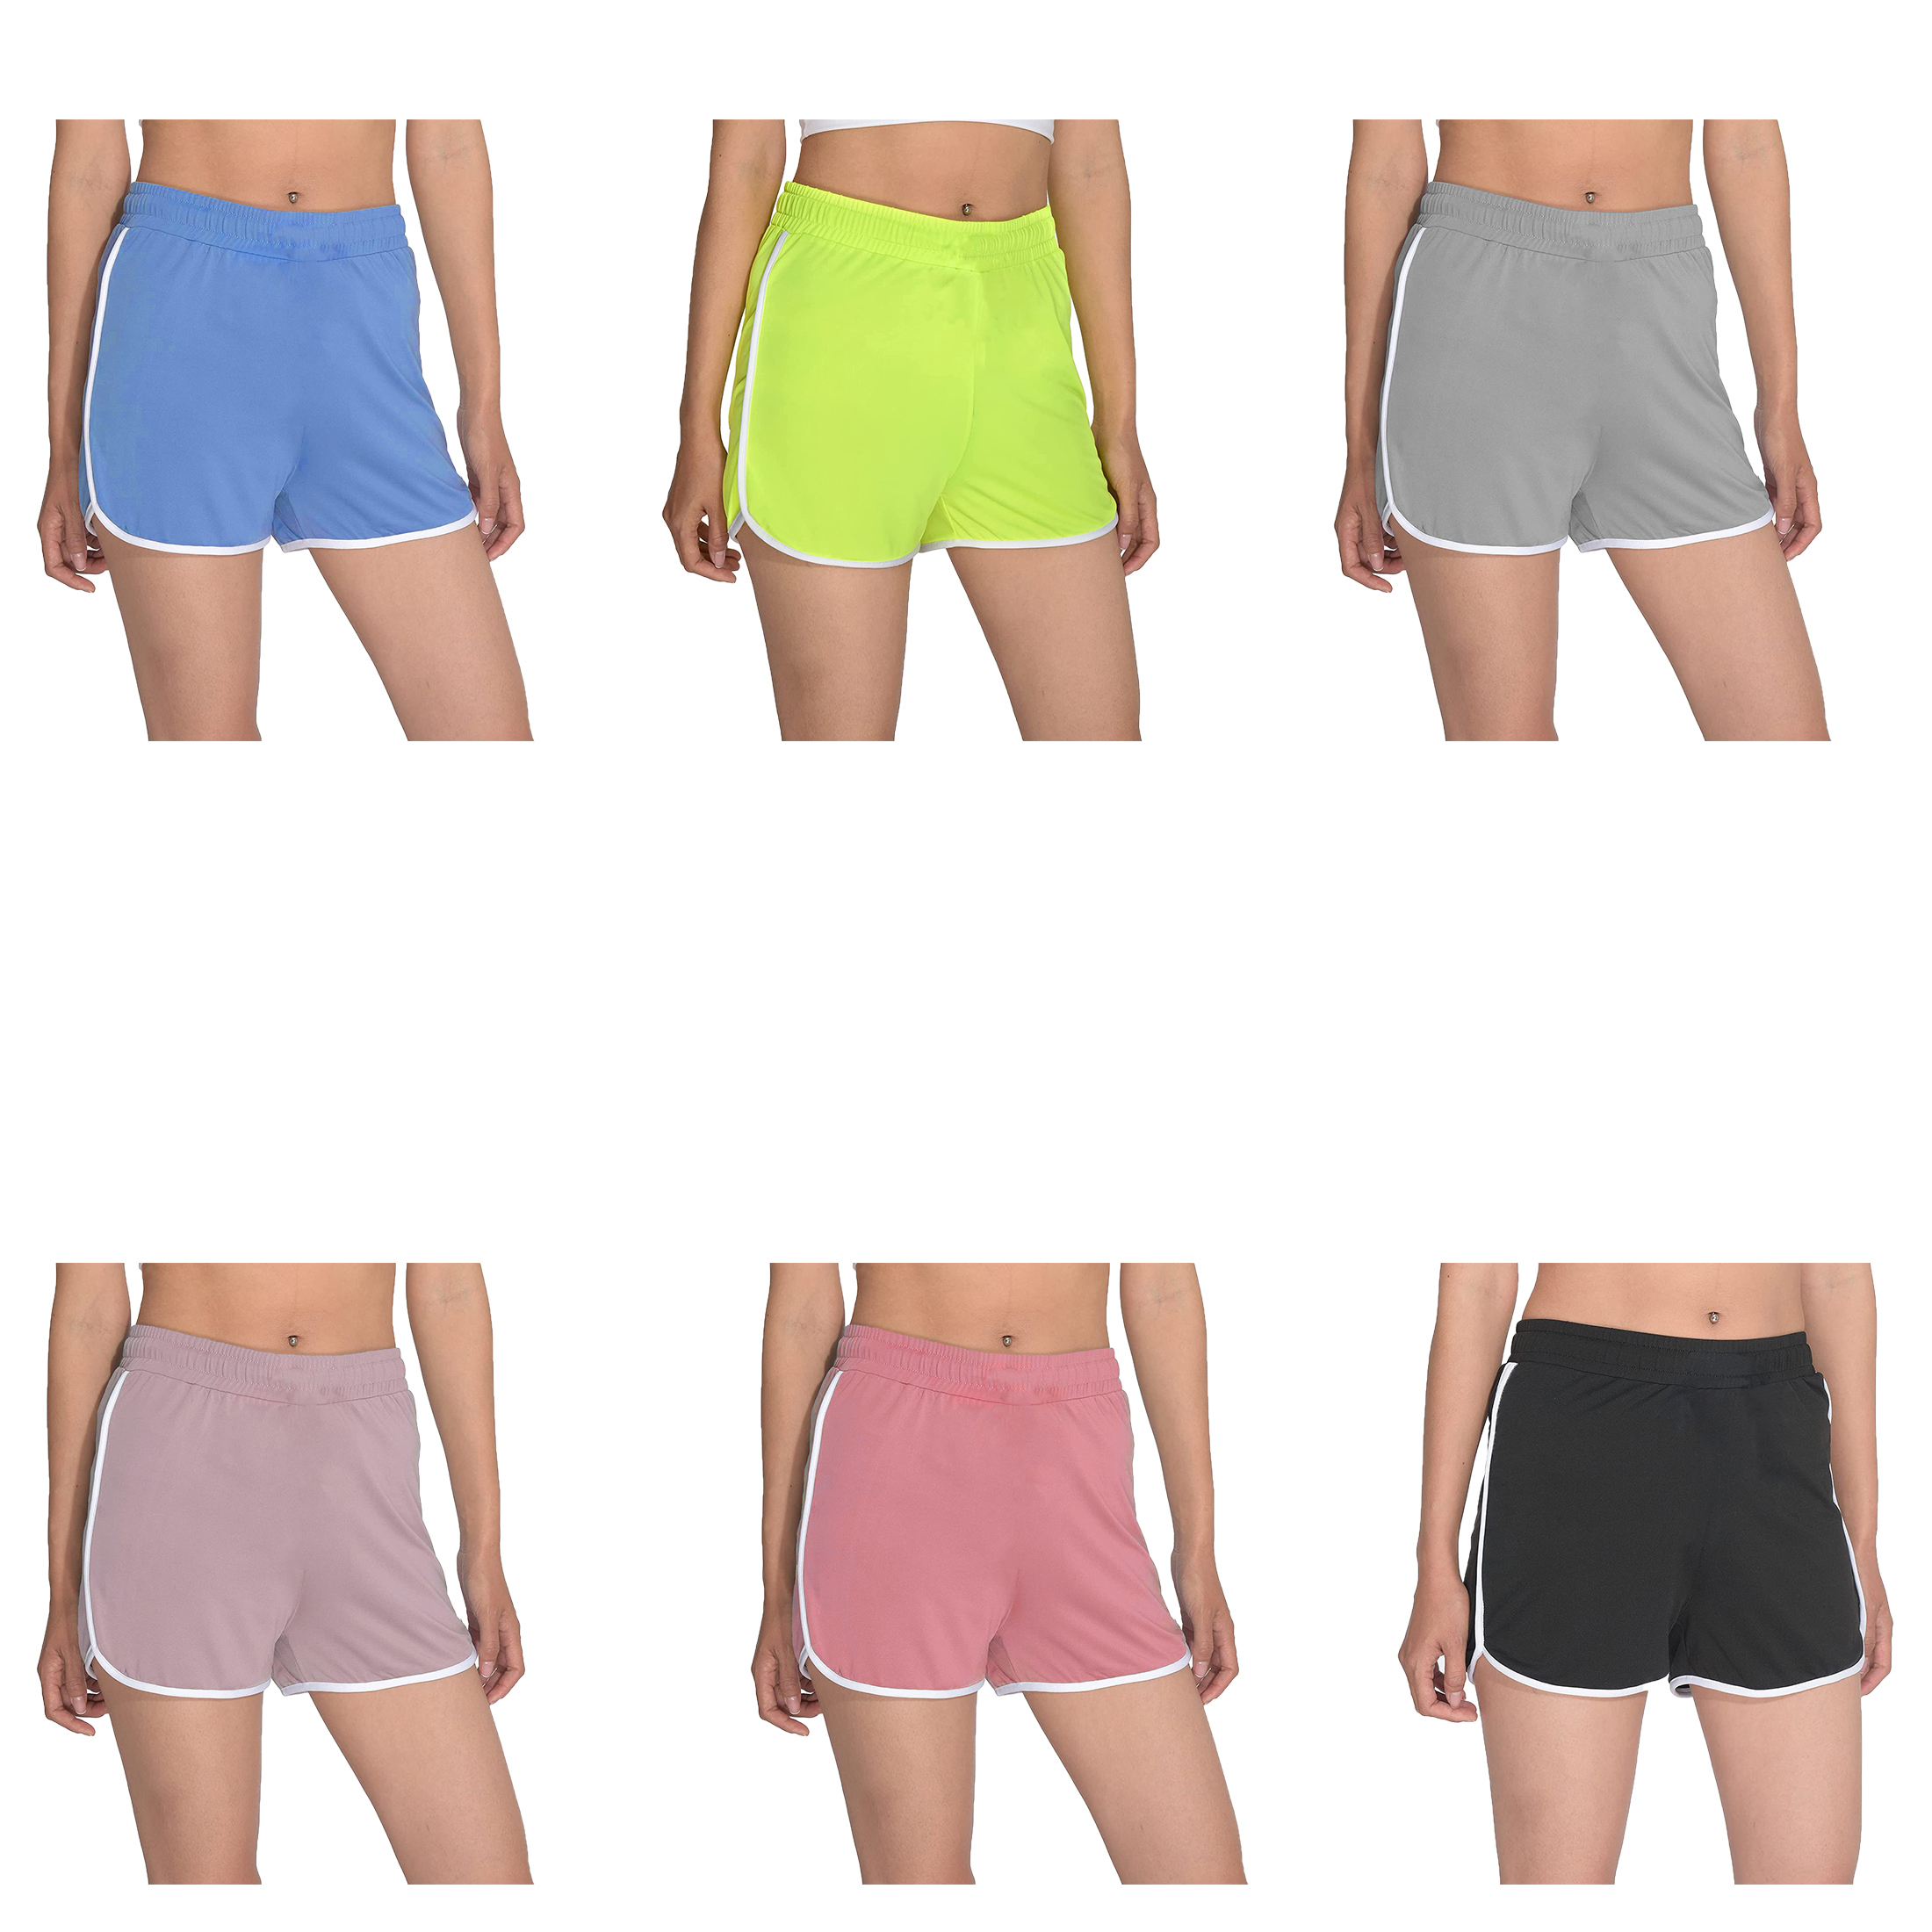 5-Pack Women's Dolphin Shorts Elastic Waist Soft Comfy Running Sporty Athletic Workout Pants - M